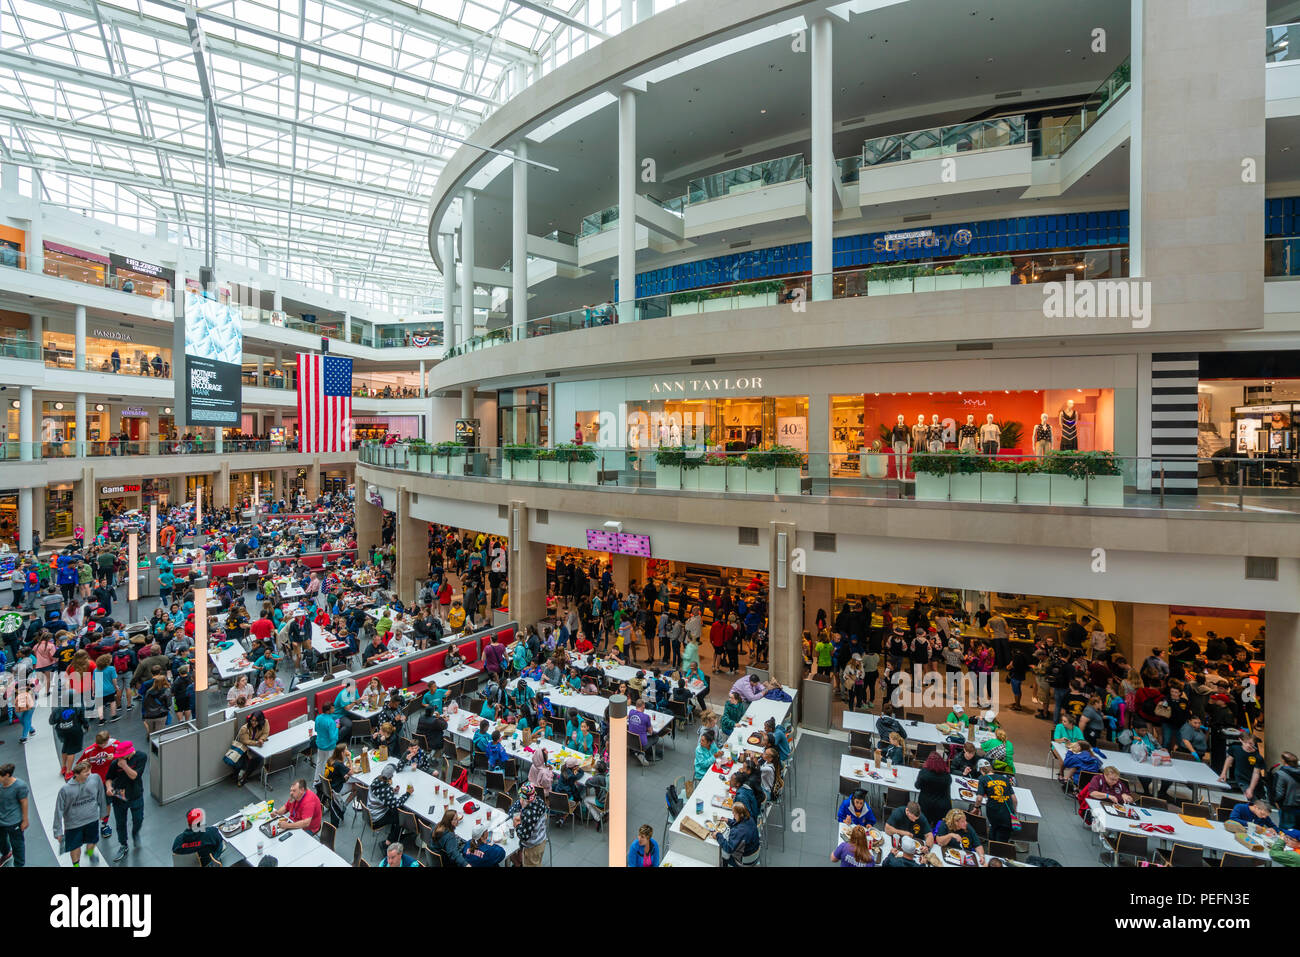 People visiting a shopping mall in the United States Stock Photo